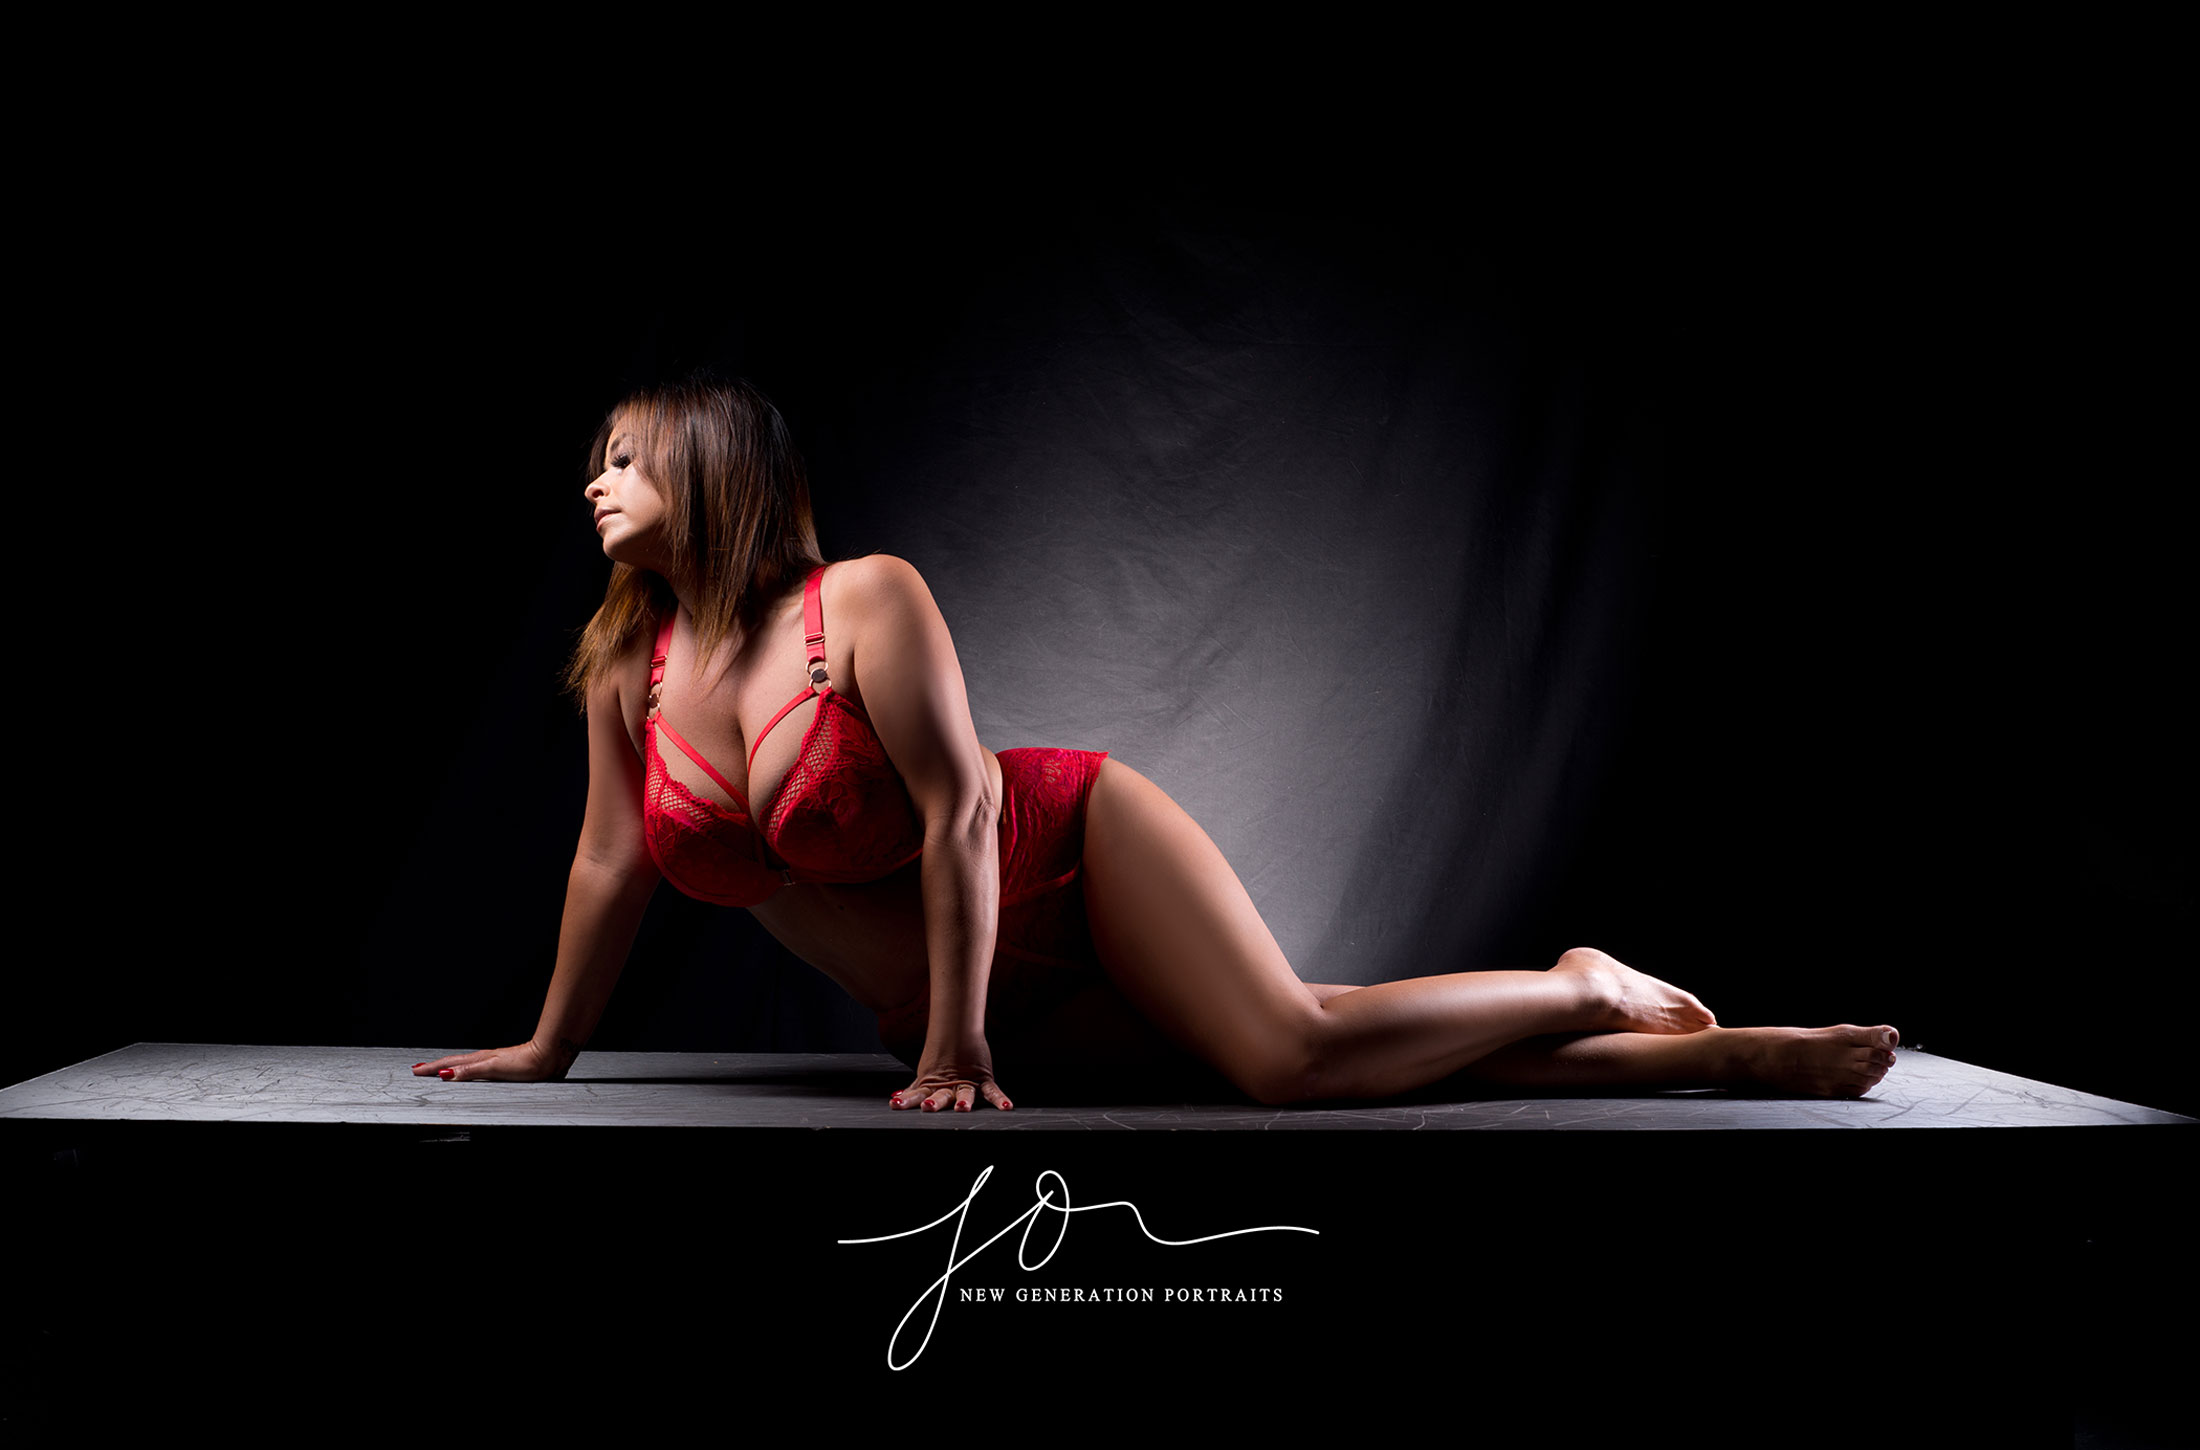 Boudoir pose on our platform set. Sedigned to flatter every lady. Captured by New Generation Portraits Ltd